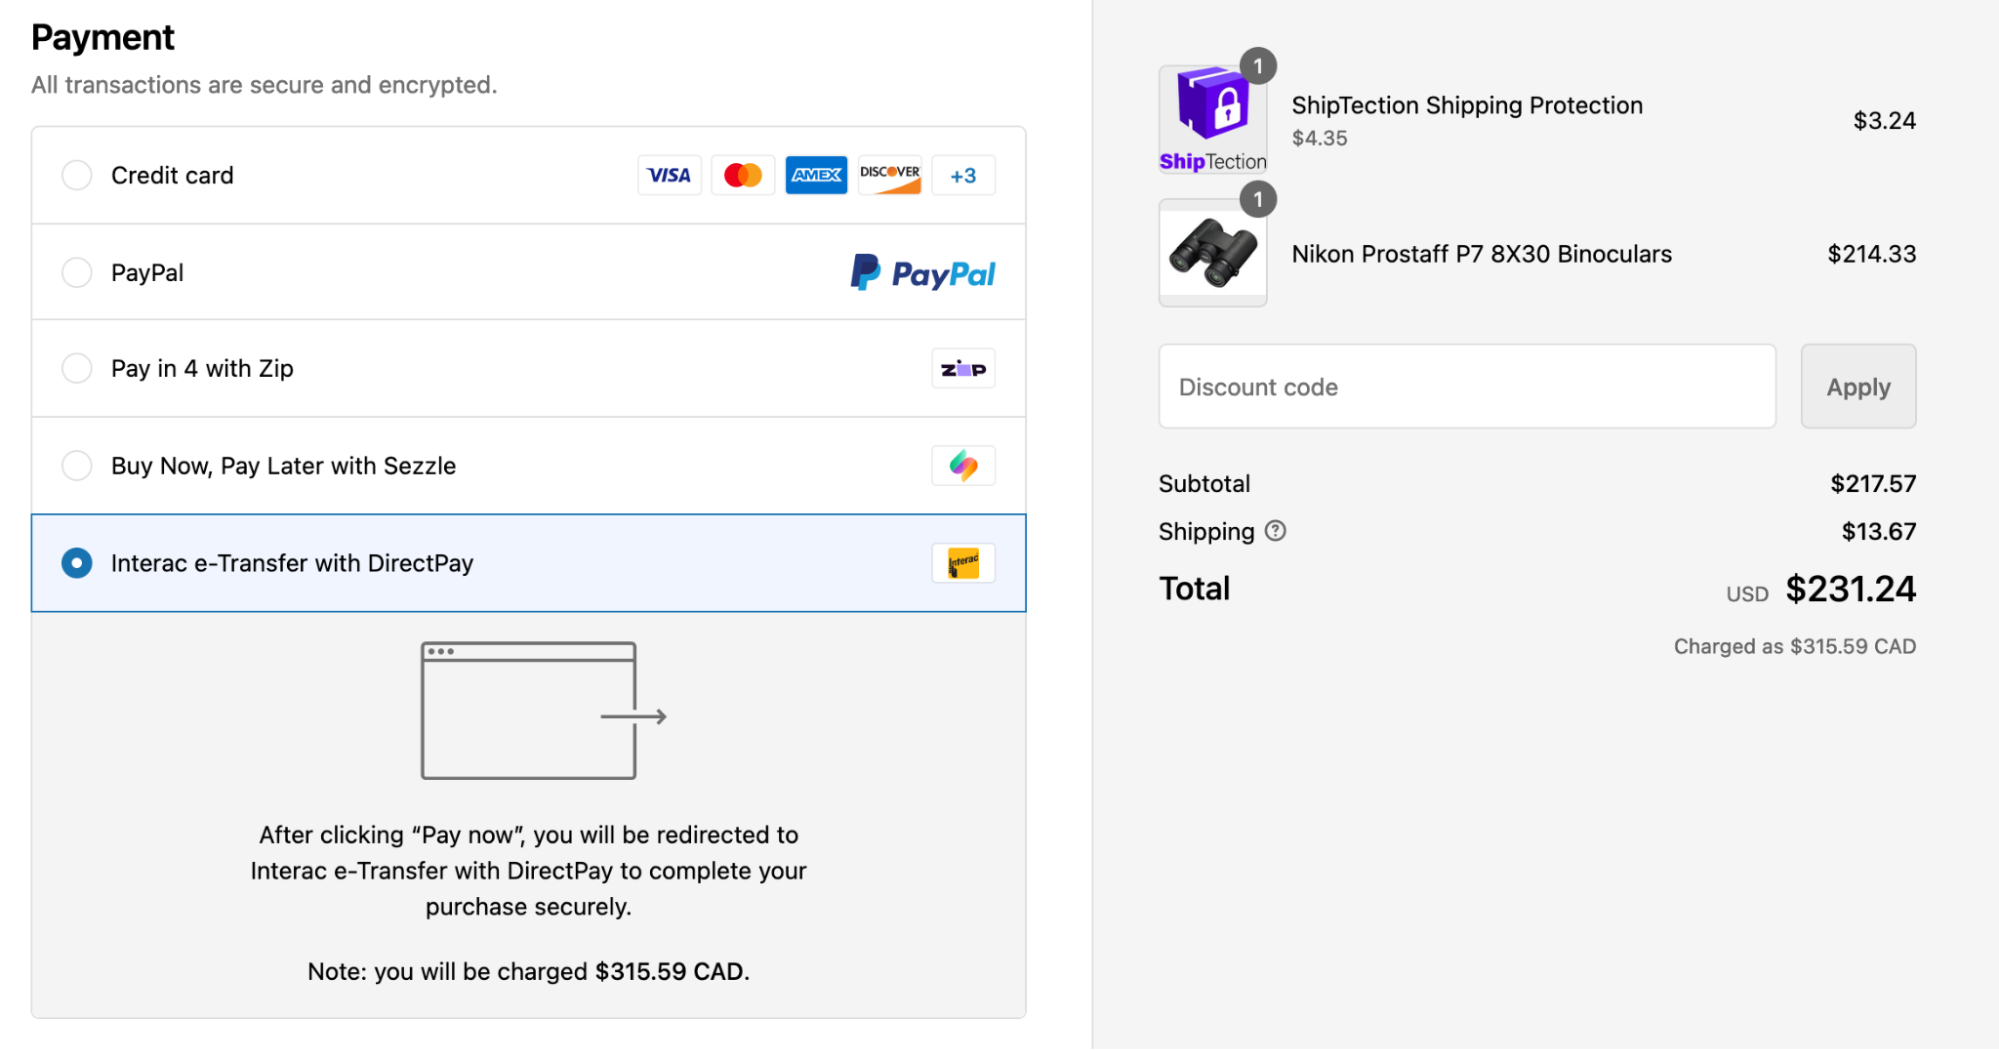 SaveonCells checkout screen showing bank transfer as a payment option